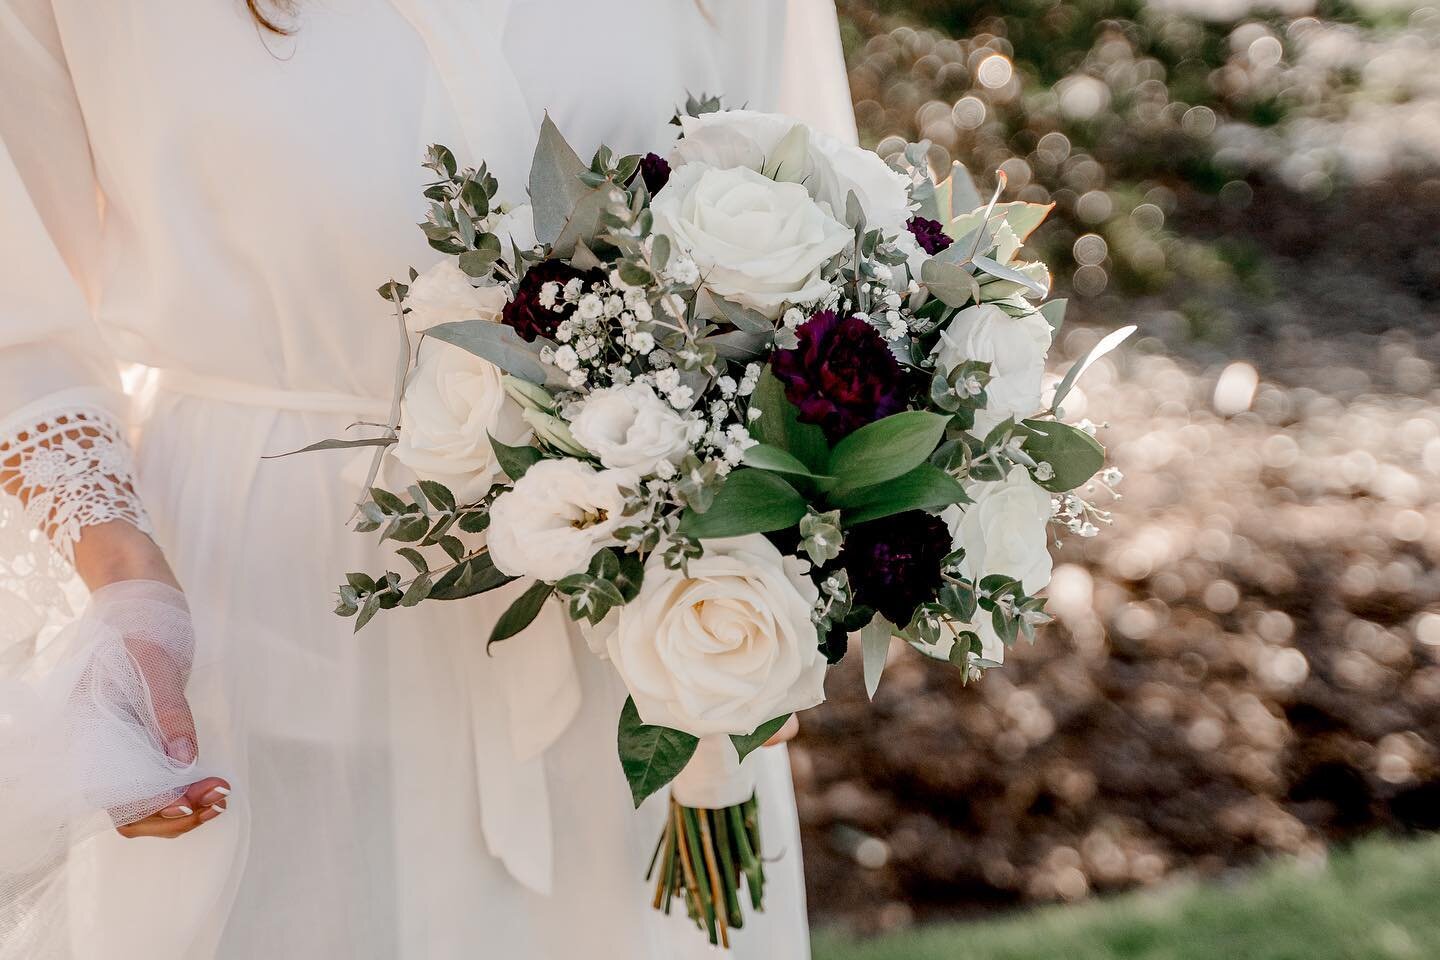 A pop of colour in a tradition white bouquet adds that personal touch. 💐
.
.
Thank you Elise for choosing La Botanic to supply your wedding flowers. 
.
.
Photography by @jessdekker1 
.
#wedding 
#flowers 
#bigday 
#event